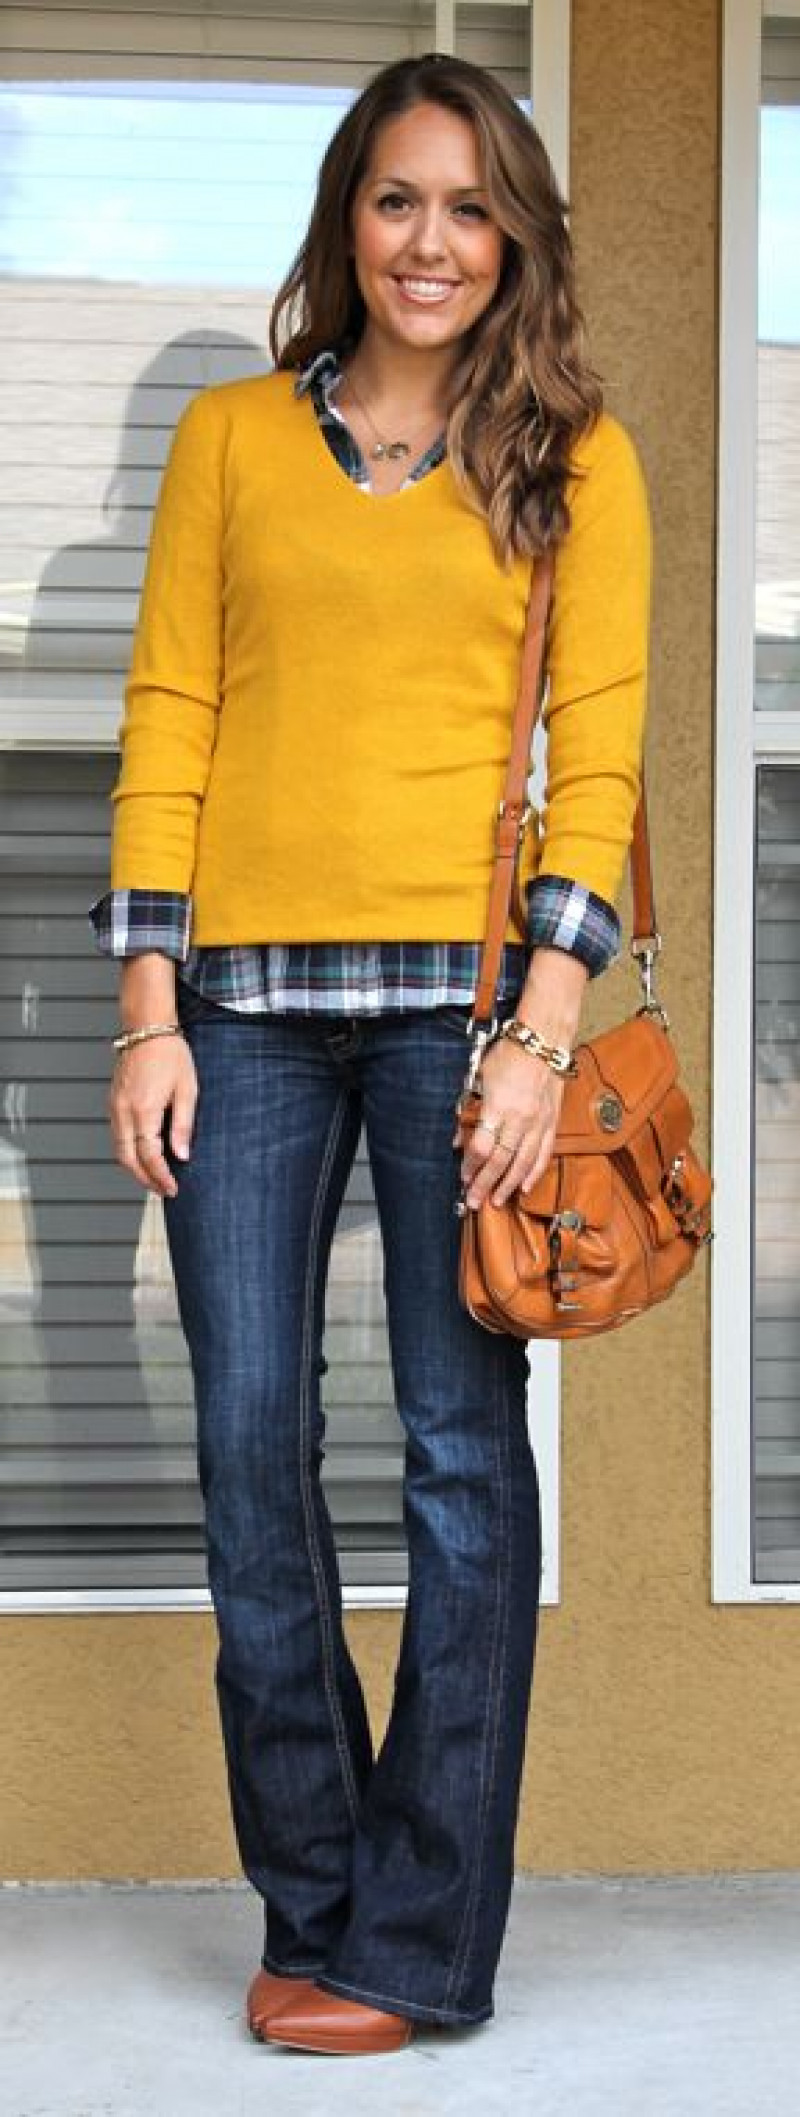 blue jeans, yellow sweater